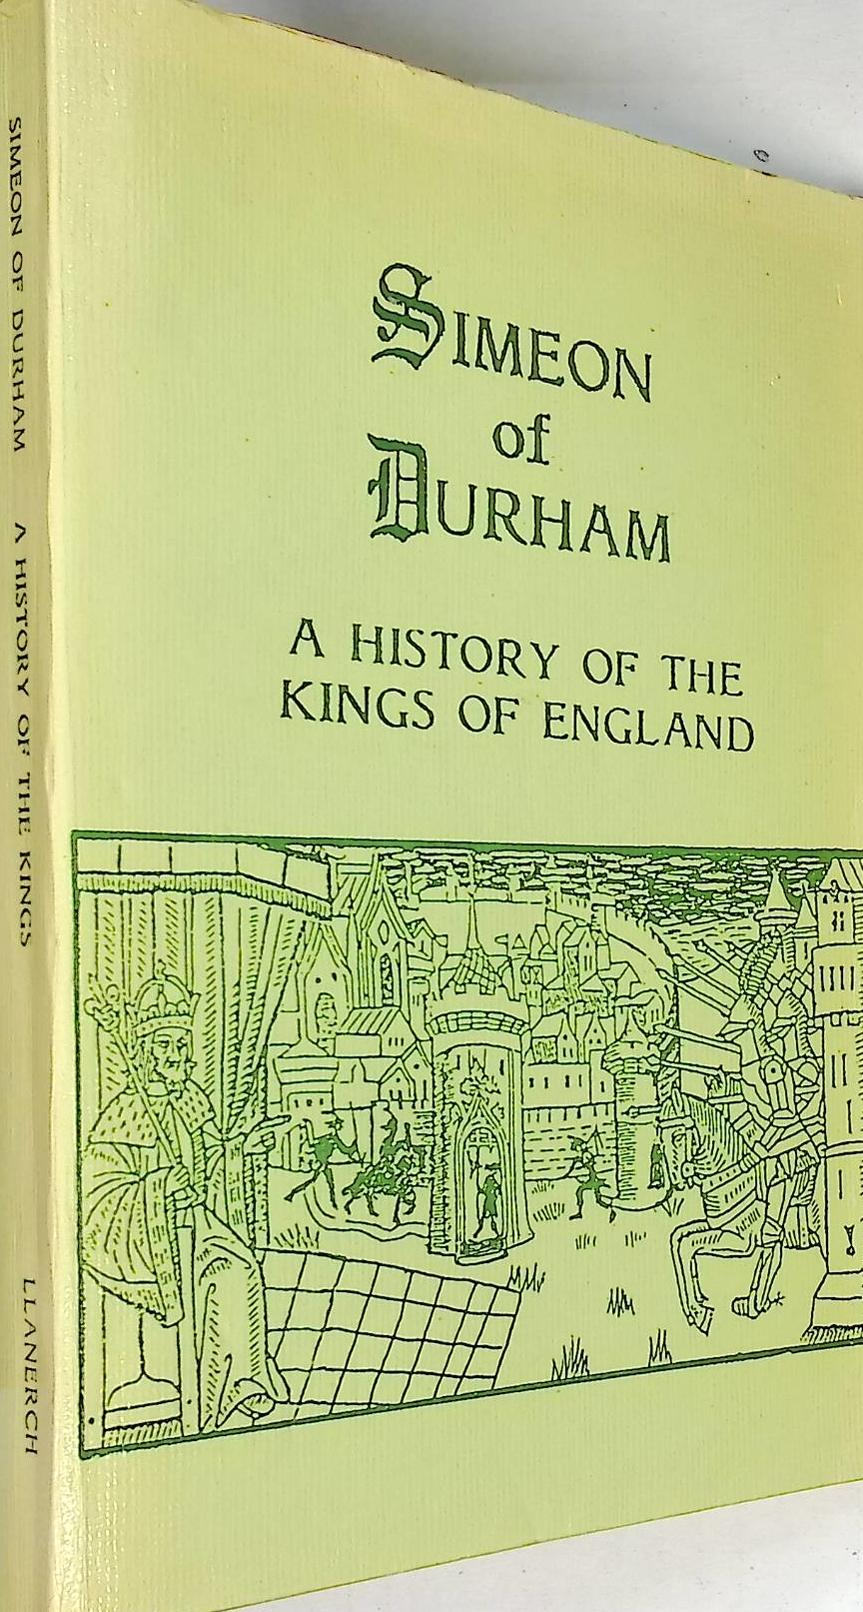 A History of the Kings of England